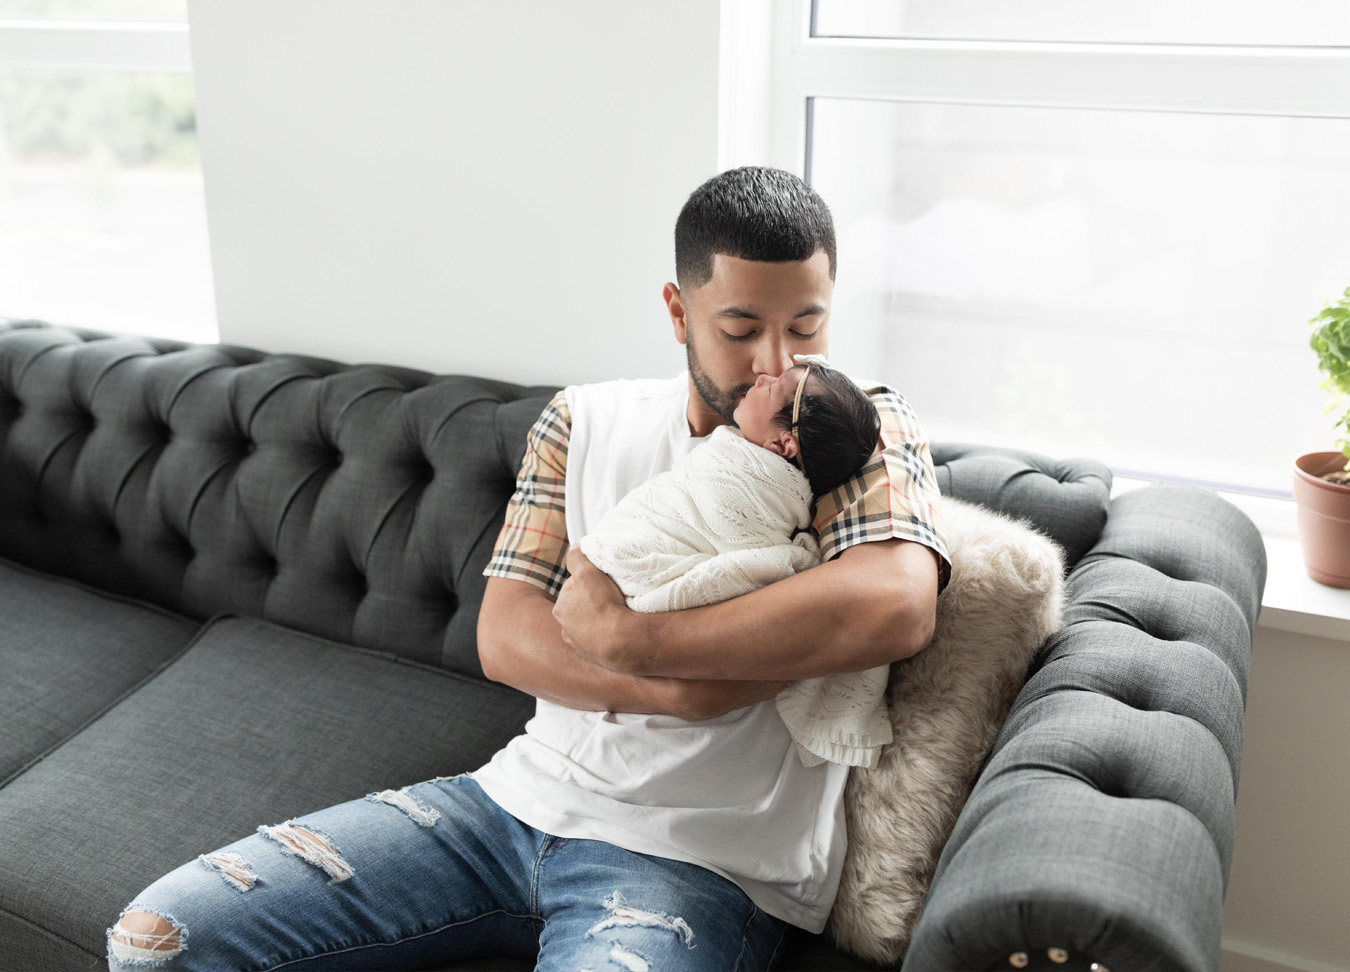 DC Birth Centers, dad holding newborn baby, sitting on a couch and giving her a kiss. Photographed by a newborn photographer in D.C.